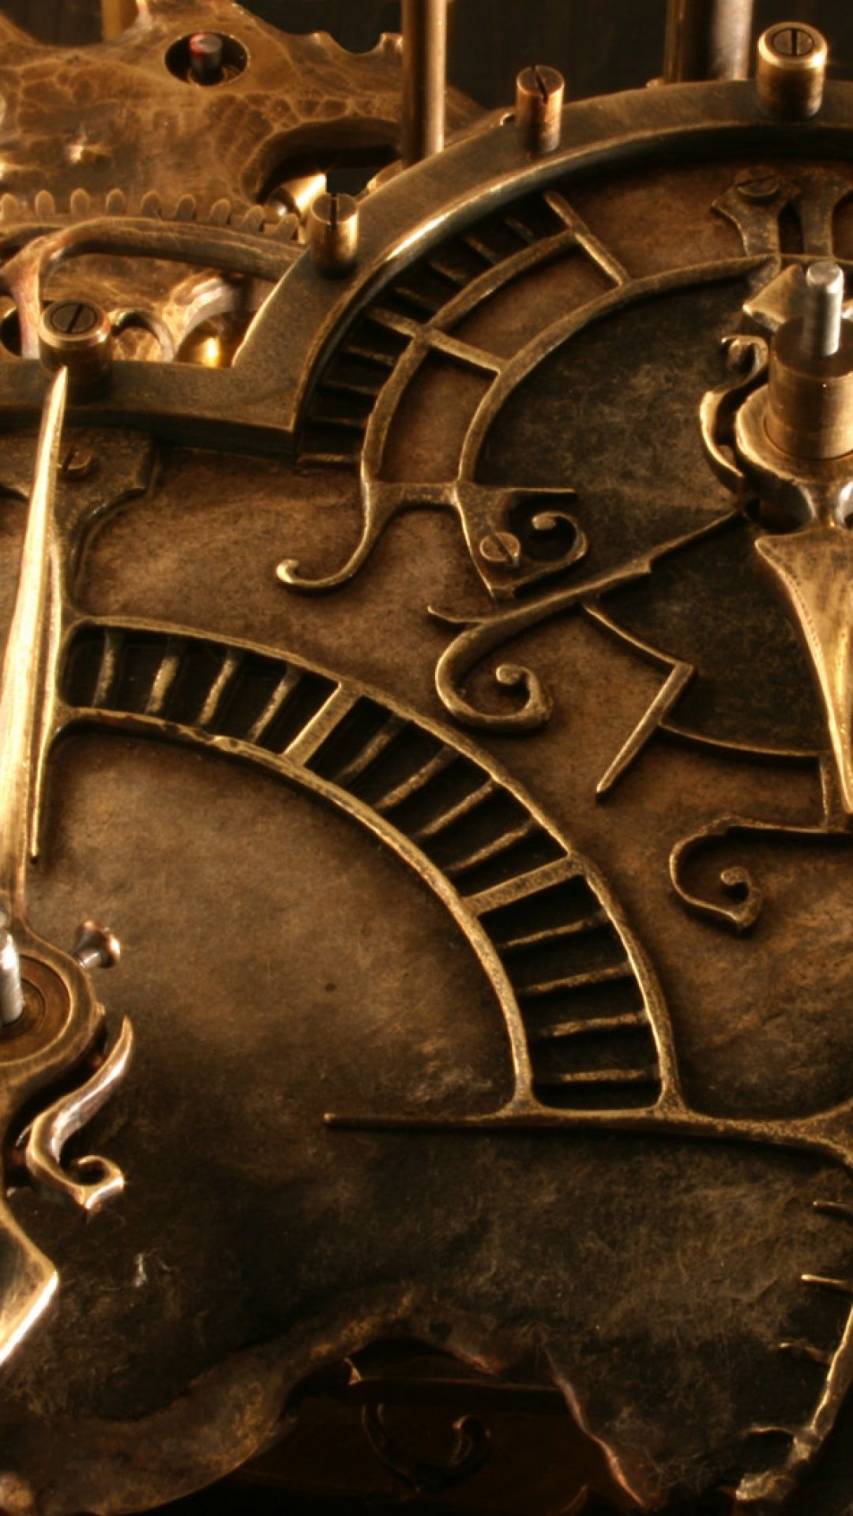 IPhone wallpaper of a steampunk clock with gears and cogs - Steampunk